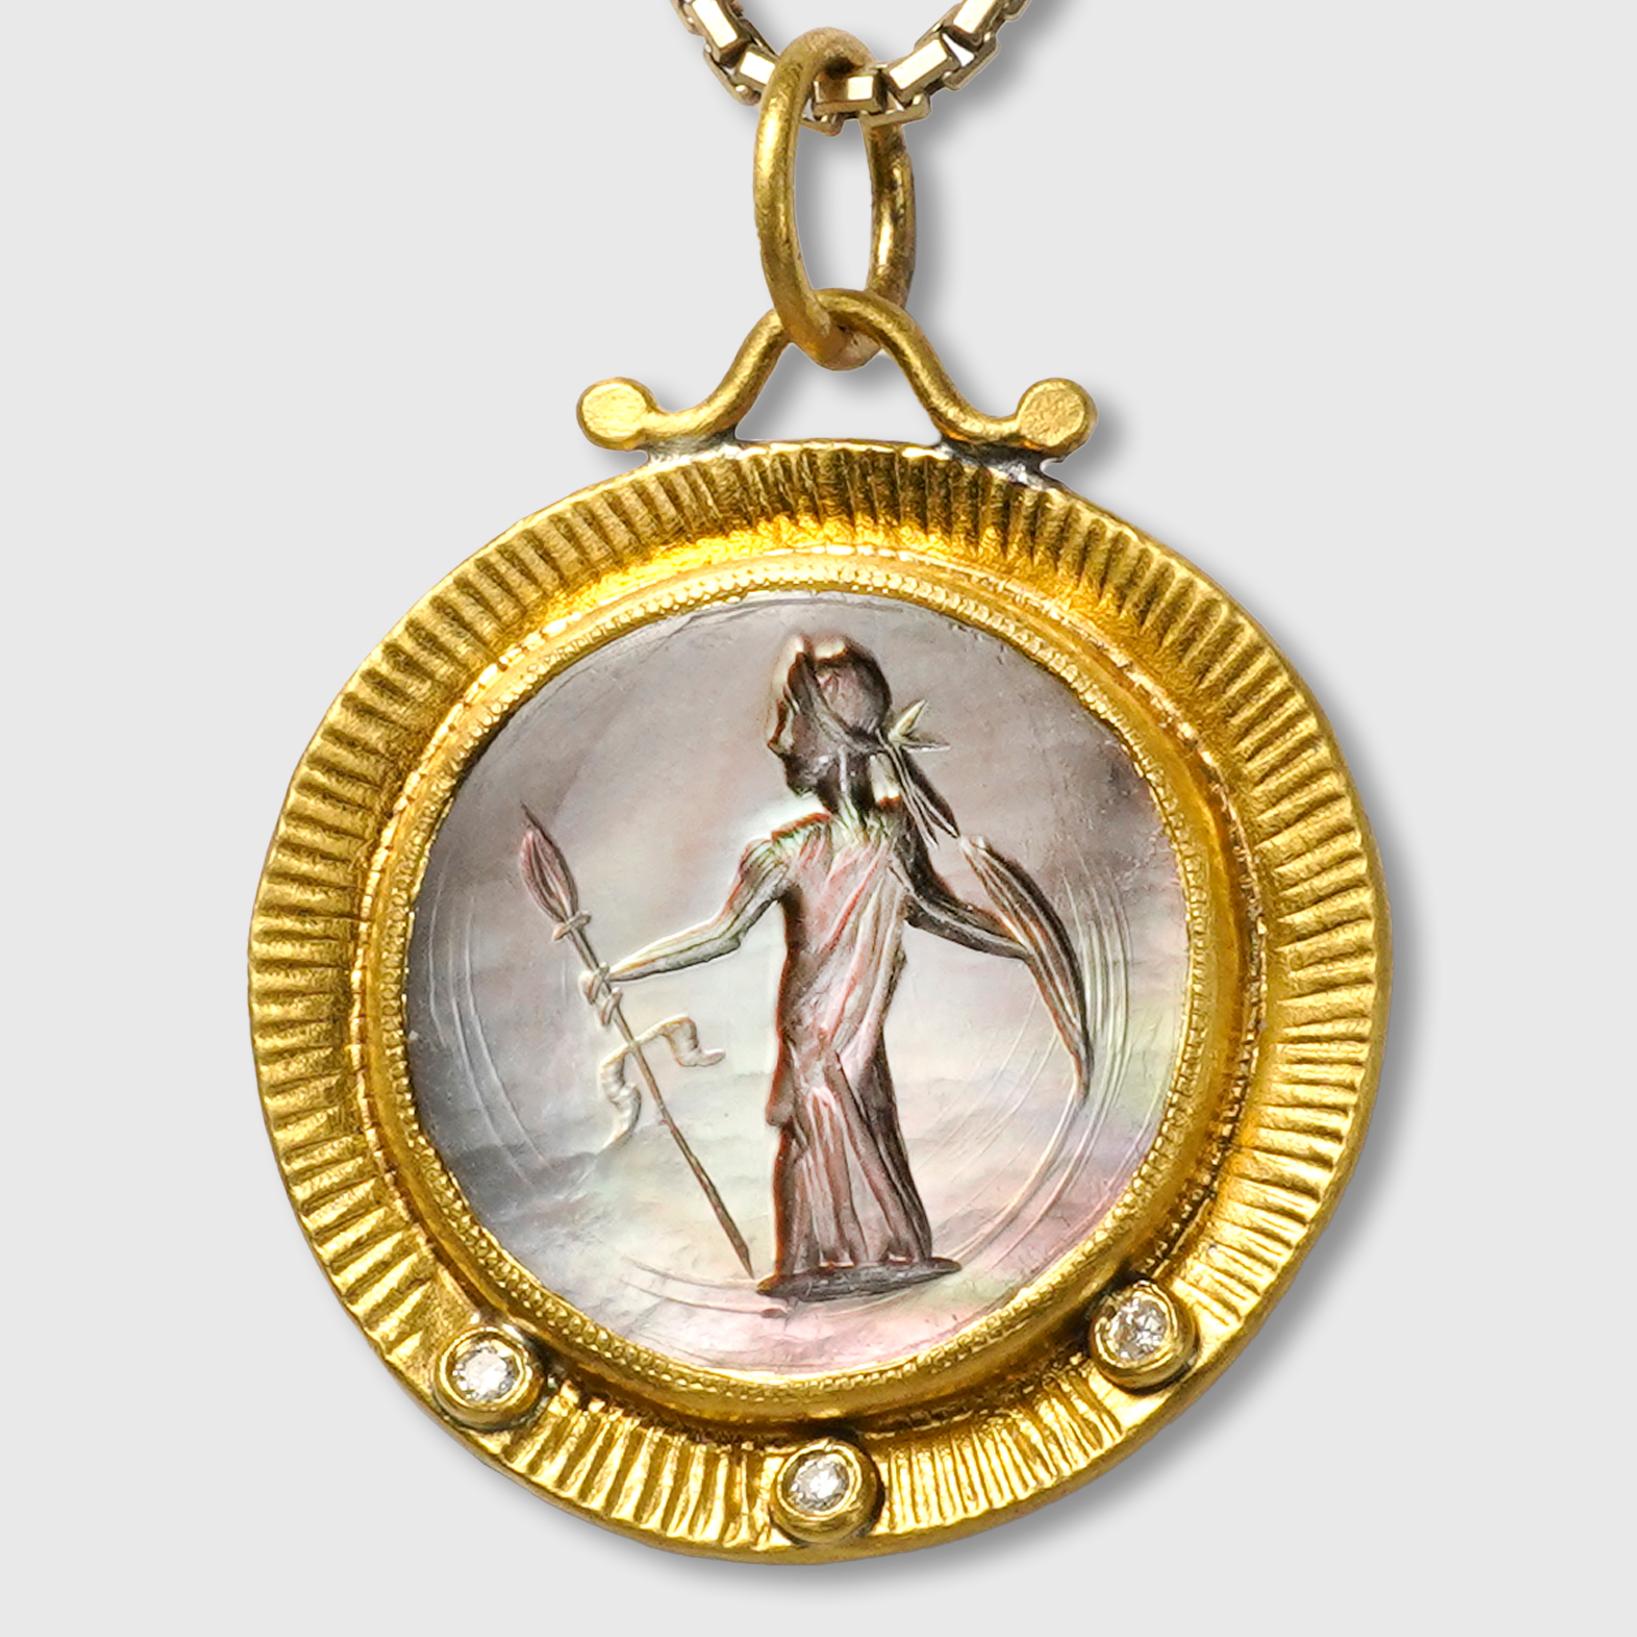 Ancient Roman Intaglio Pendant, Poseidon - 24kt Yellow Gold, Mother of Pearl with 0.03ct Diamonds & Silver

Ancient Roman Intaglio Pendant - 24kt Yellow Gold, Mother of Pearl with 0.03ct Diamonds & Silver, back side is plain sterling silver